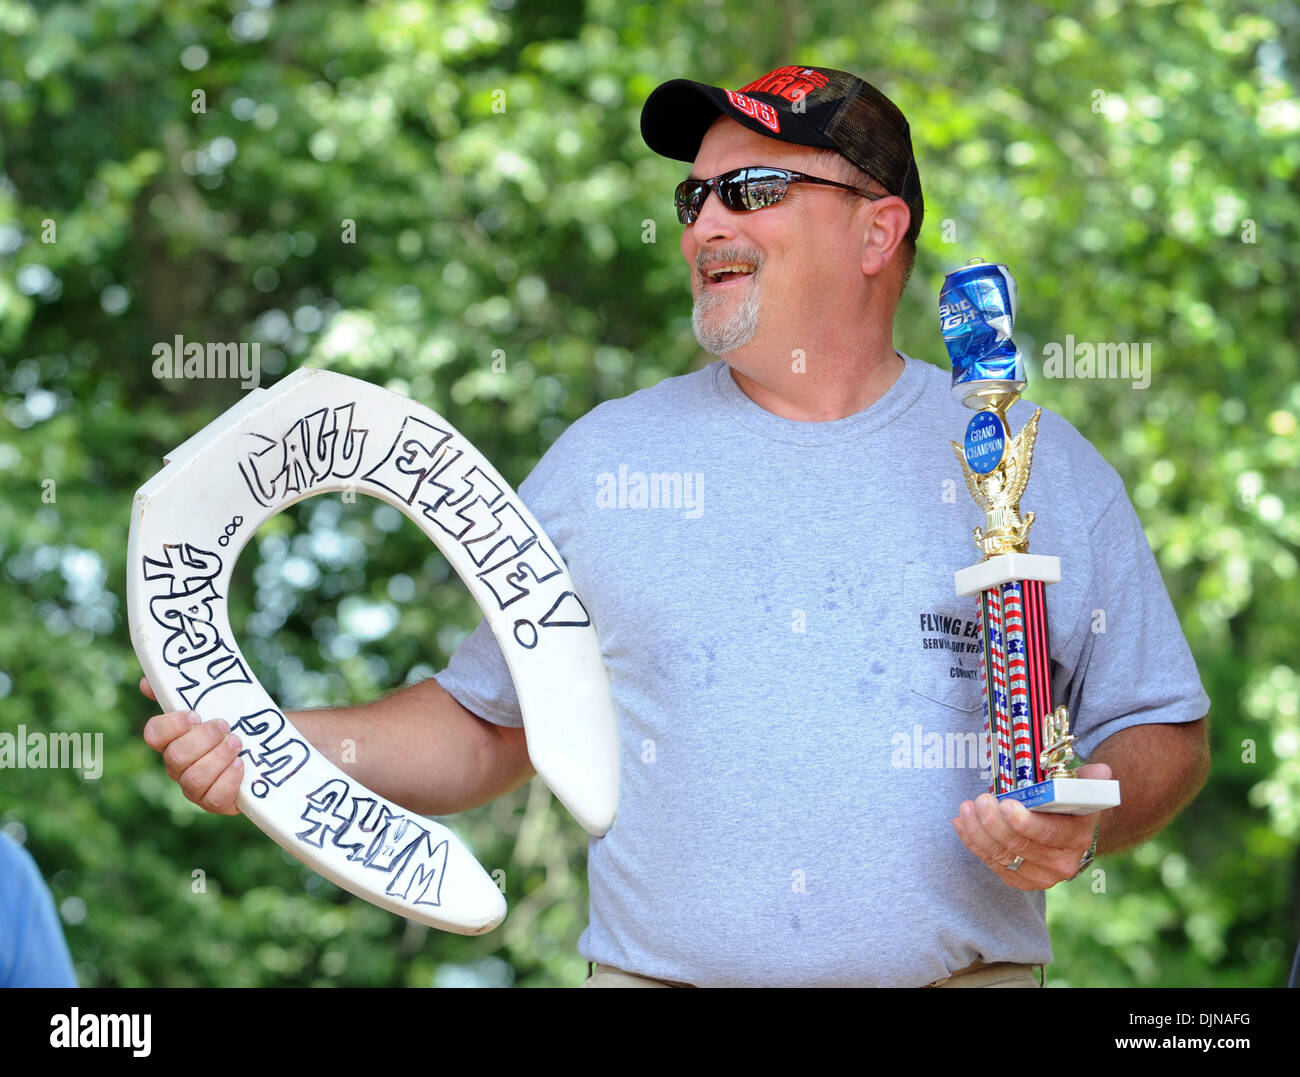 Mar 11, 2008 - East Dublin, Georgia, USA - Ryan 'Iceberg' Berg holds his trophies after winning the Redneck Horseshoes competition during the 13th annual Summer Redneck Games at Buckeye Park in East Dublin, Georgia, on Saturday. The annual homage to Southerners, began as a spoof to the 1996 Summer Olympics in Atlanta. Thousands of revelers attend the event whose events include bobb Stock Photo